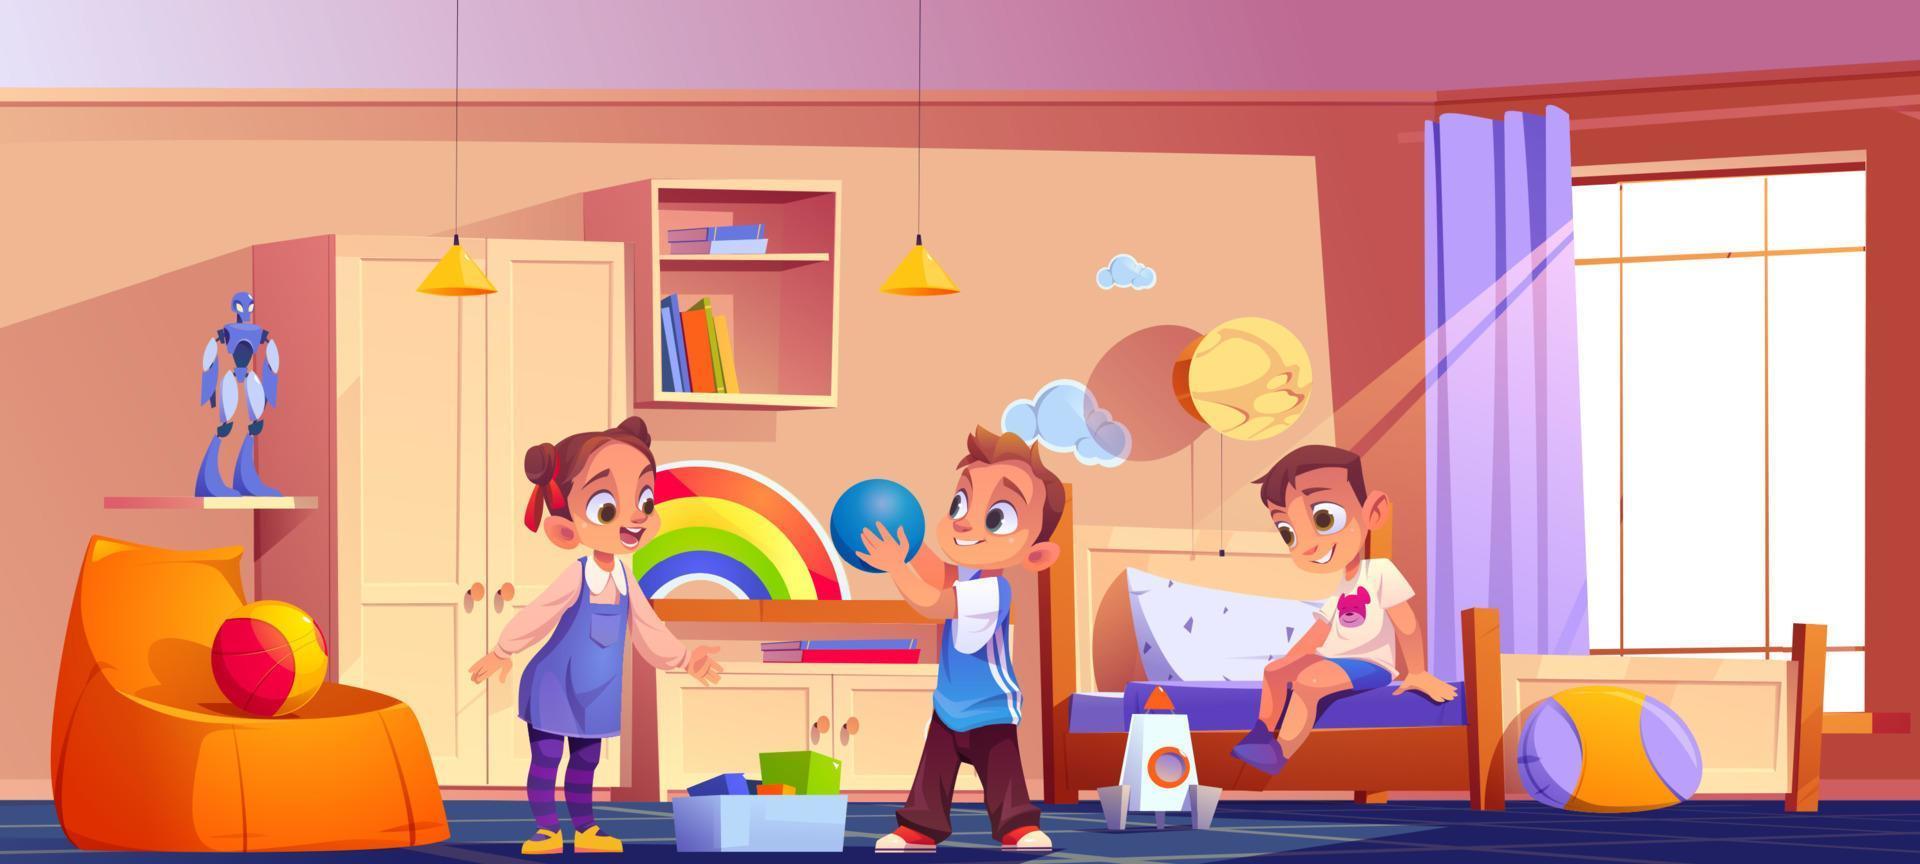 Kids playing in room, children at home interior vector